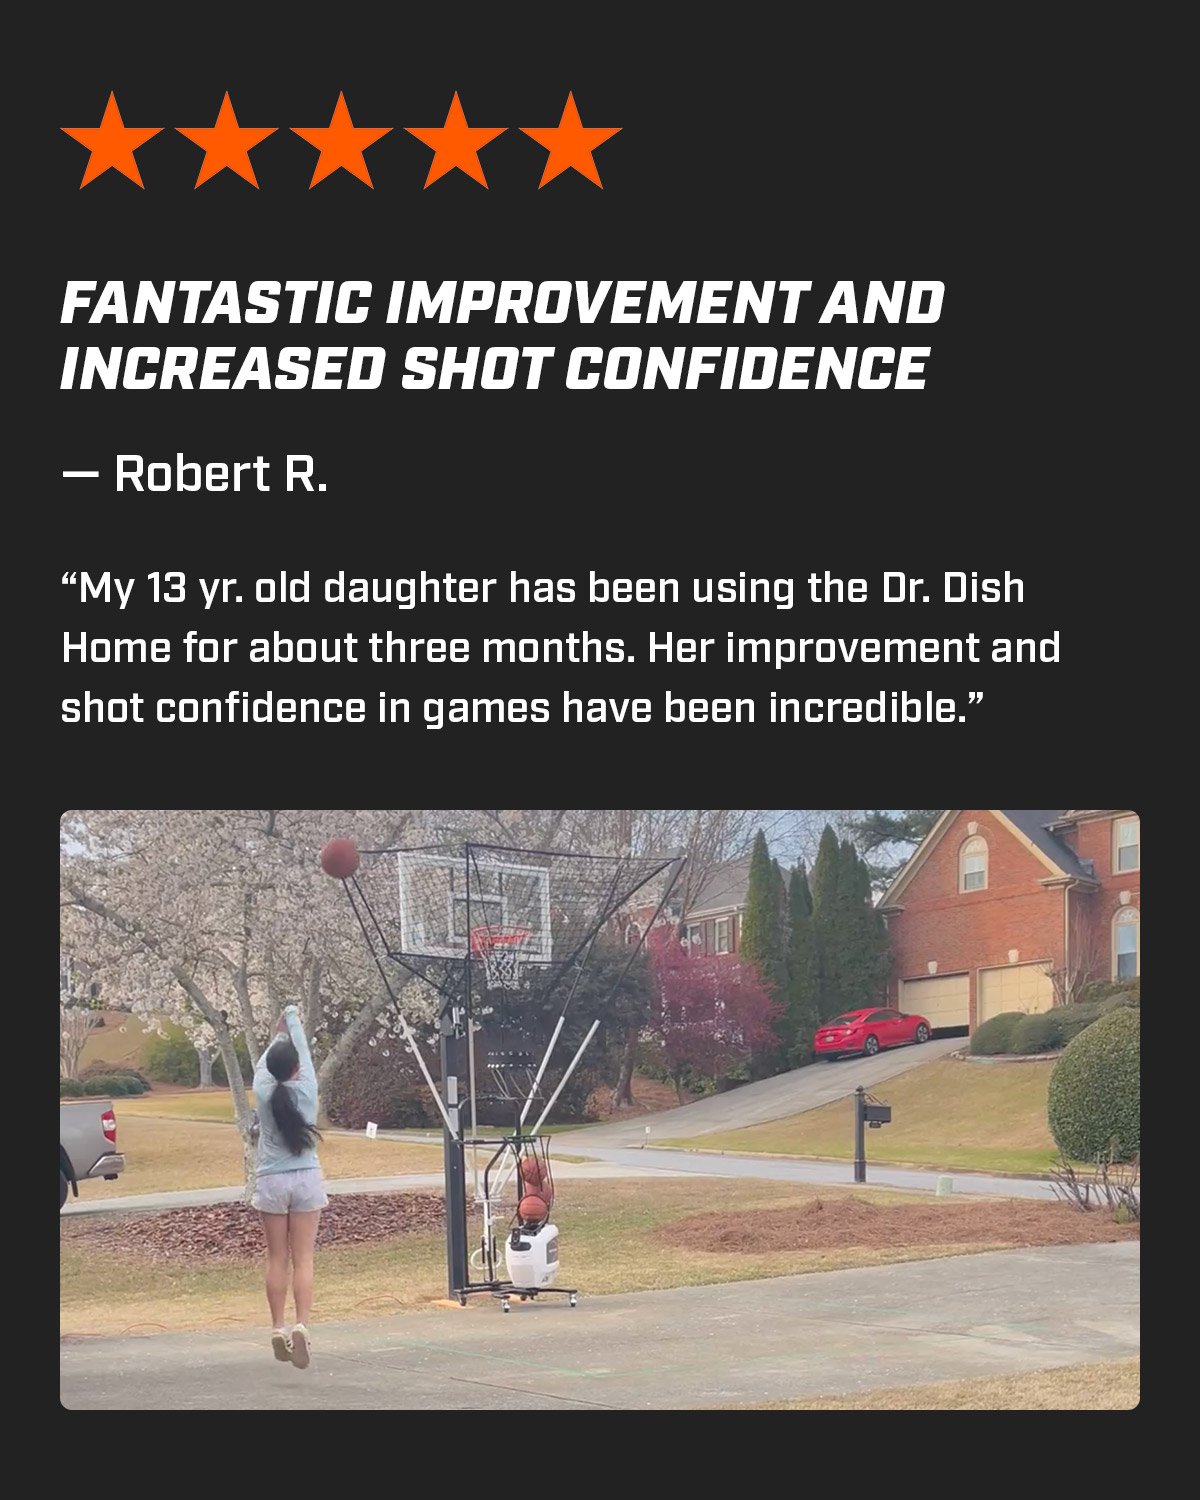 Fantastic Improvement and Increased Shot Confidence